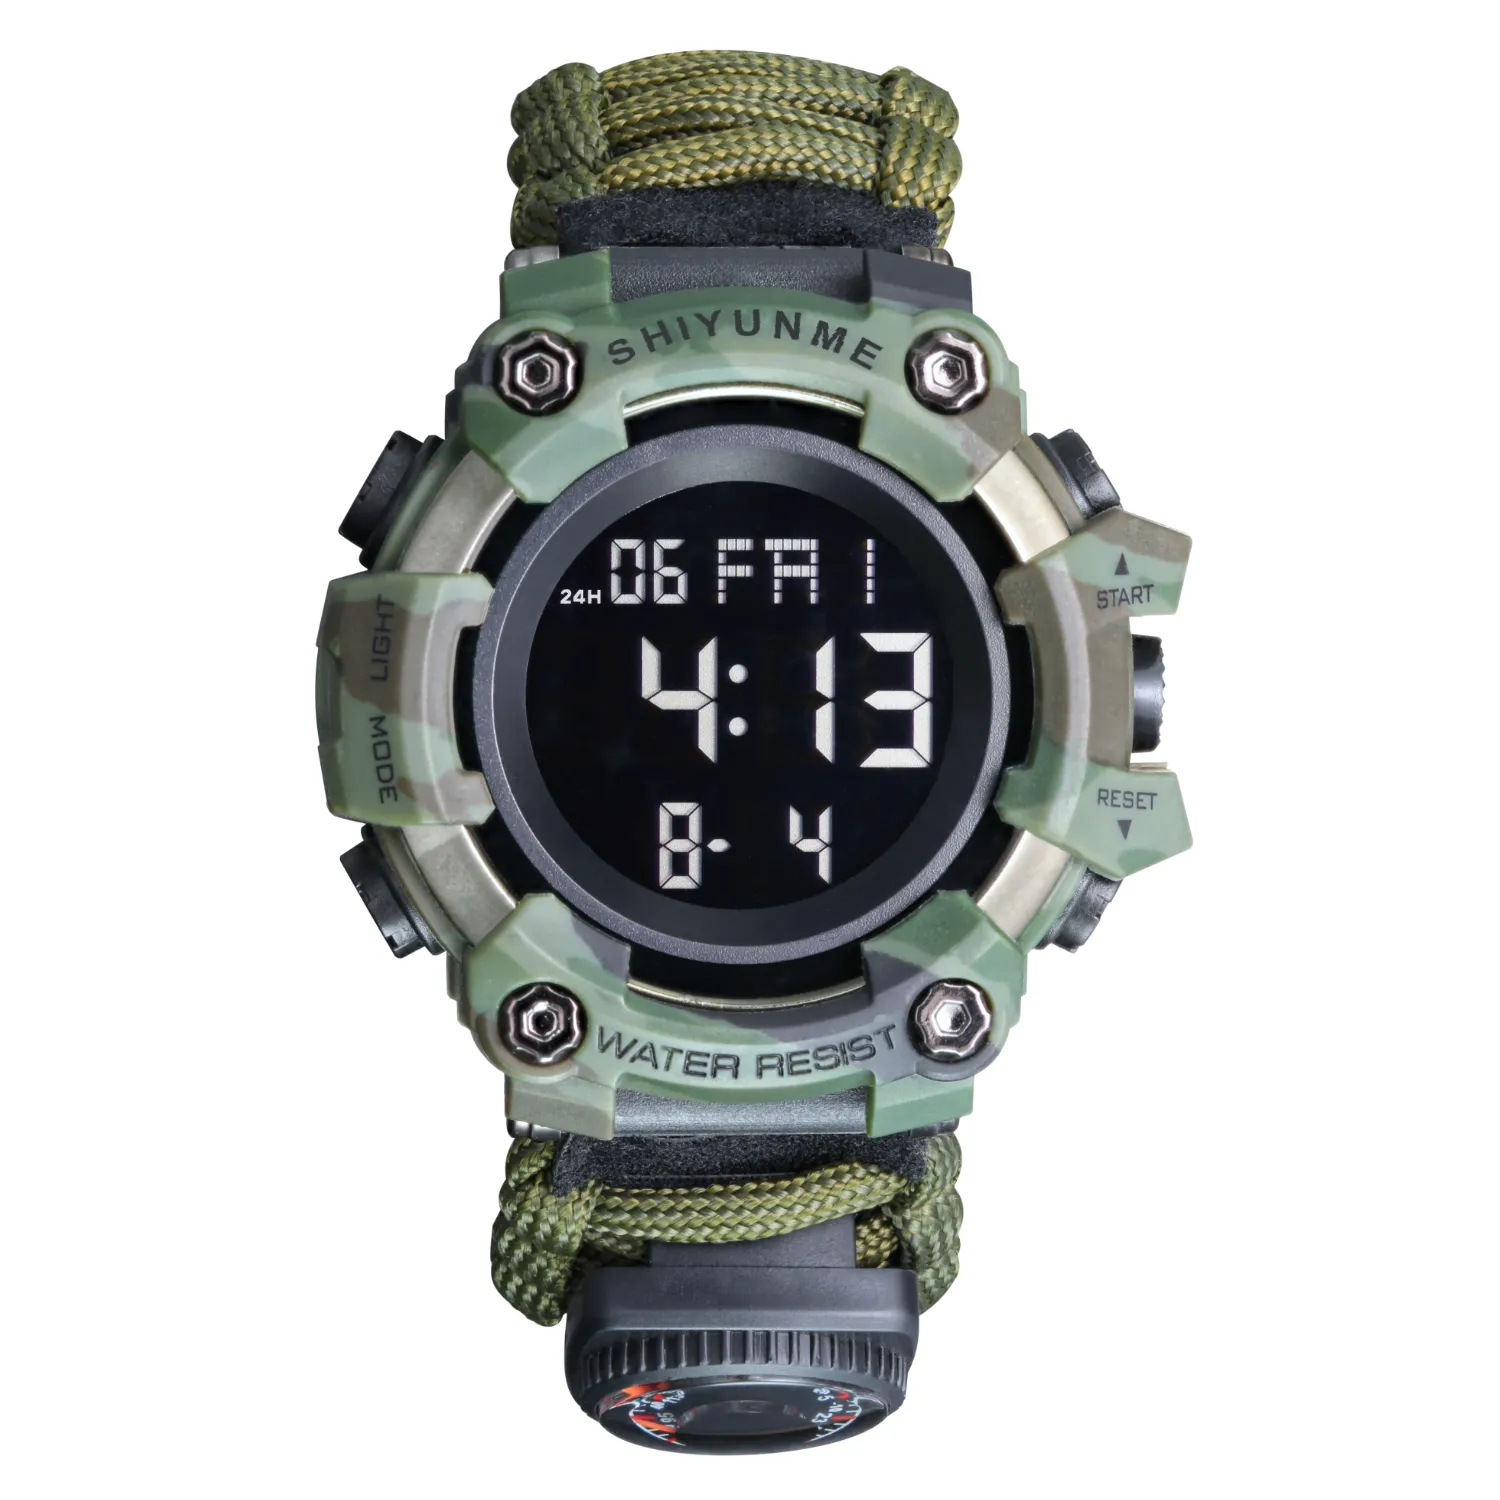 The latest outdoor sports electronic smart watch fashion personality men's cross-country multi-functional watch